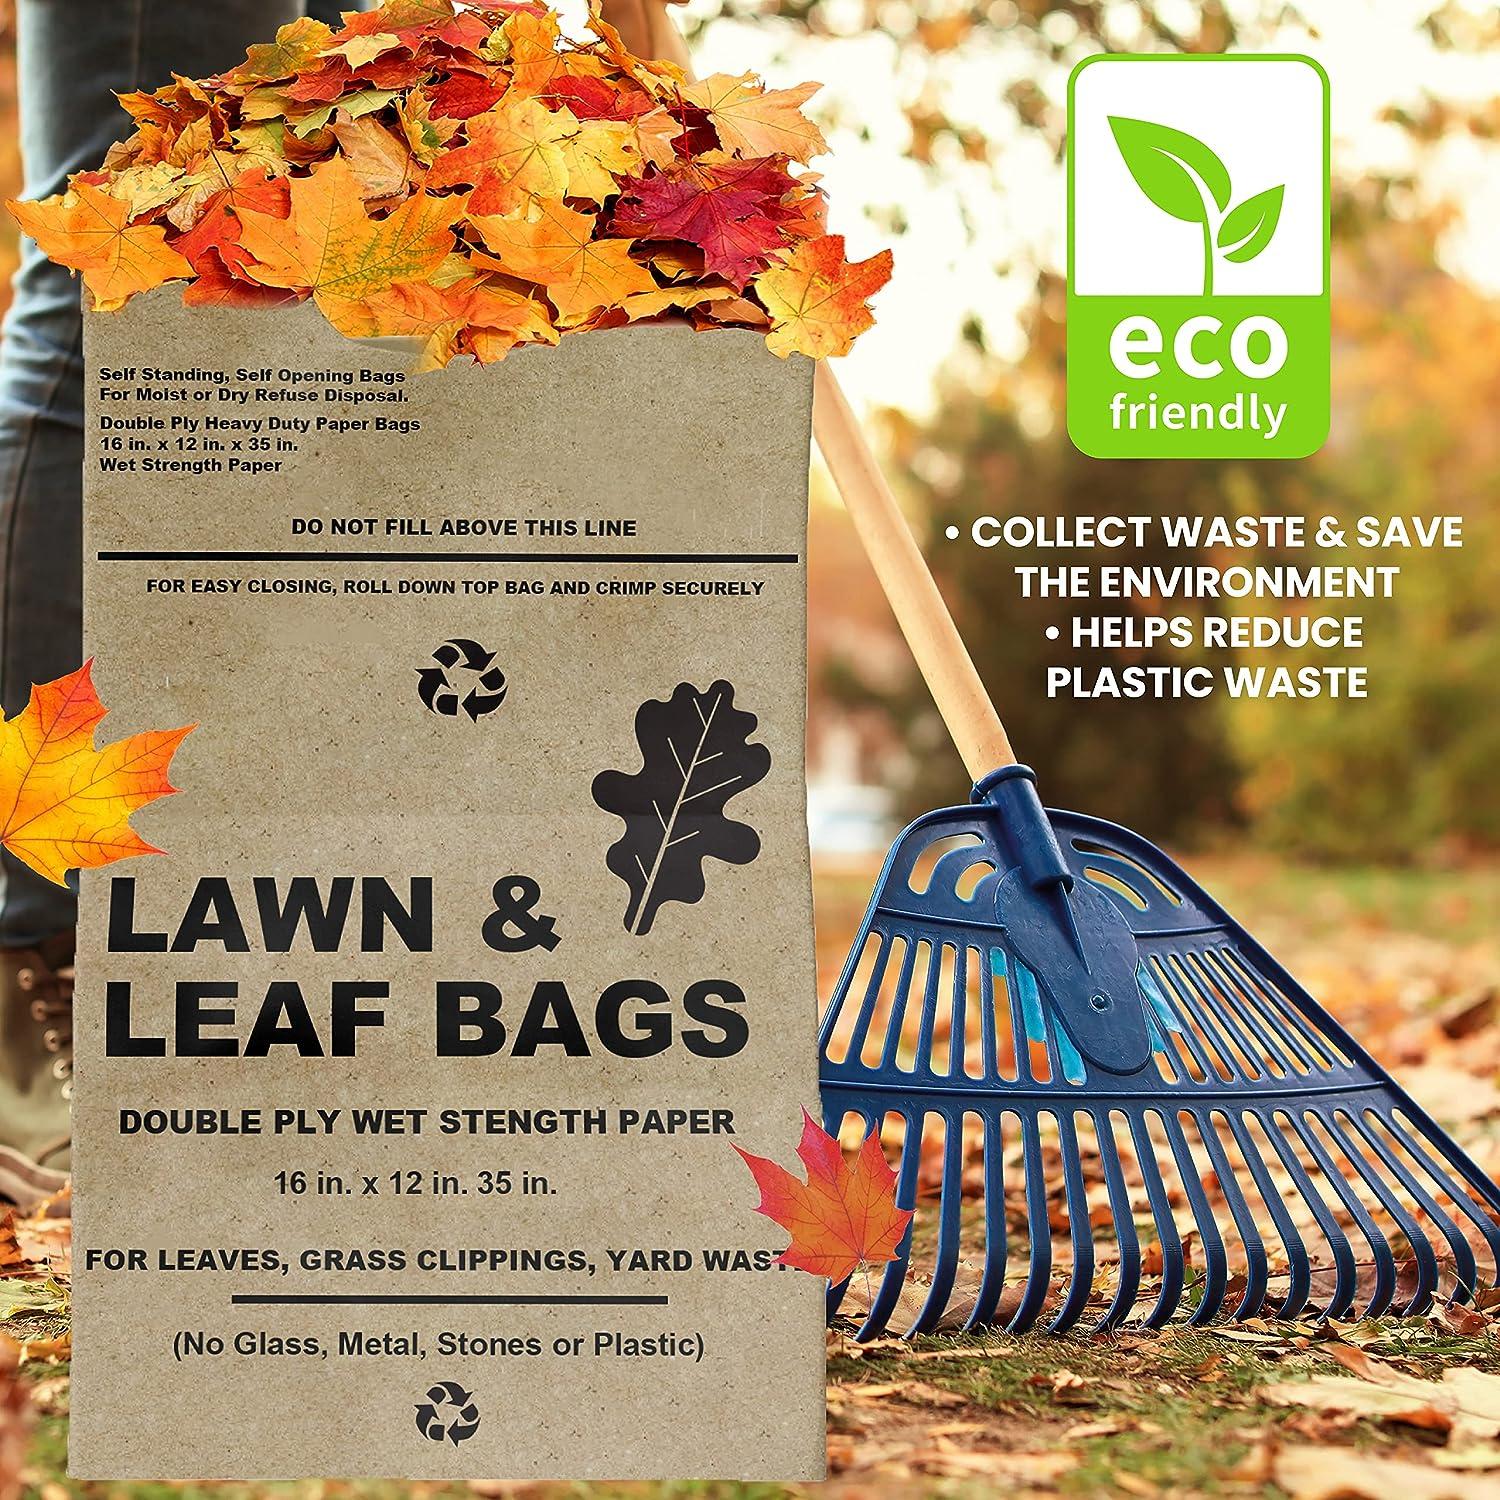 Home Depot's Leaf Bags and their Eco-Terrible Tips - GardenRant